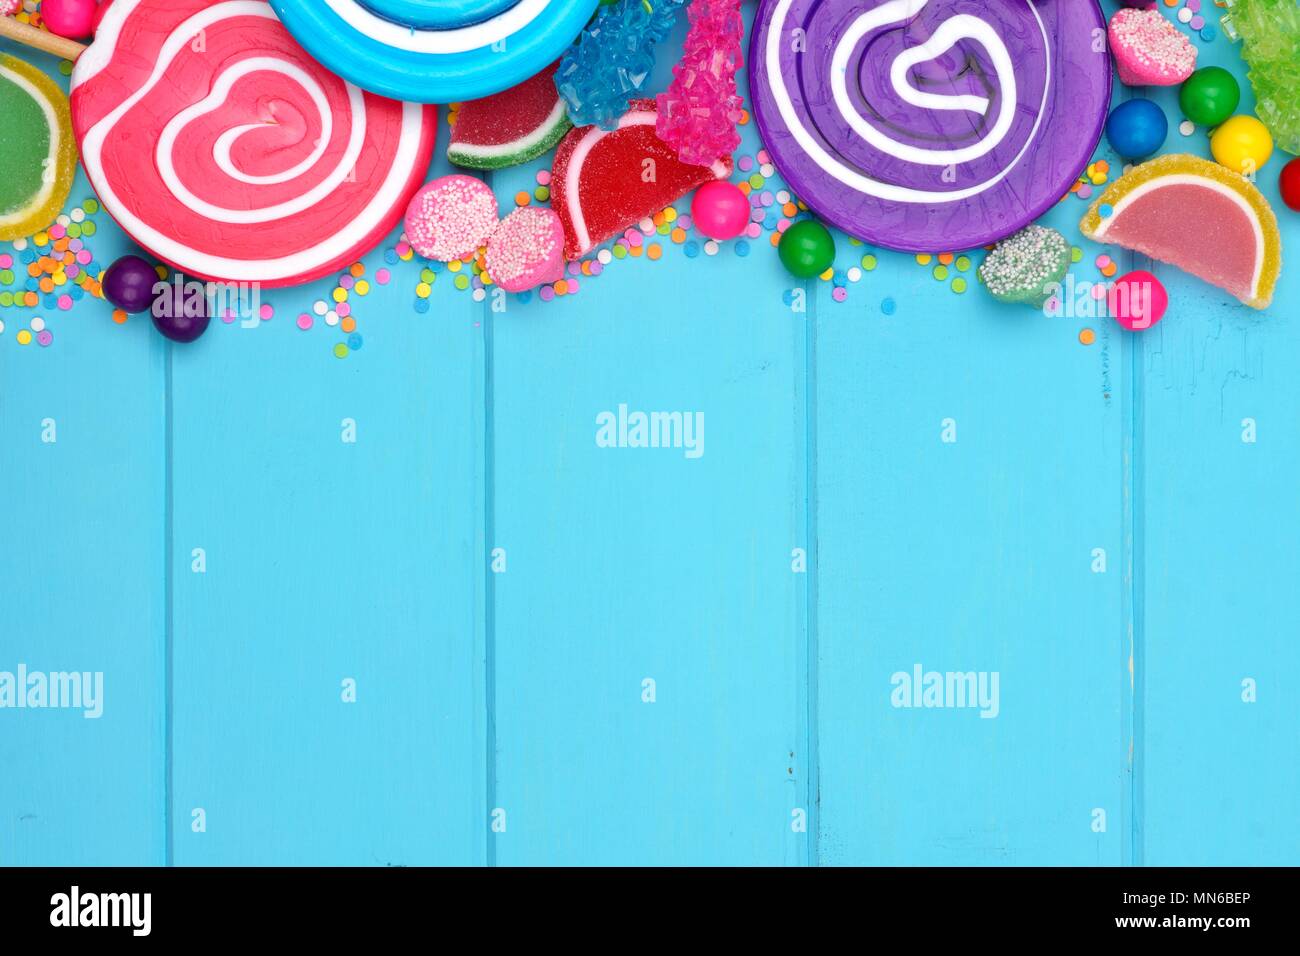 Top border of assorted colorful candies against a blue wood background Stock Photo